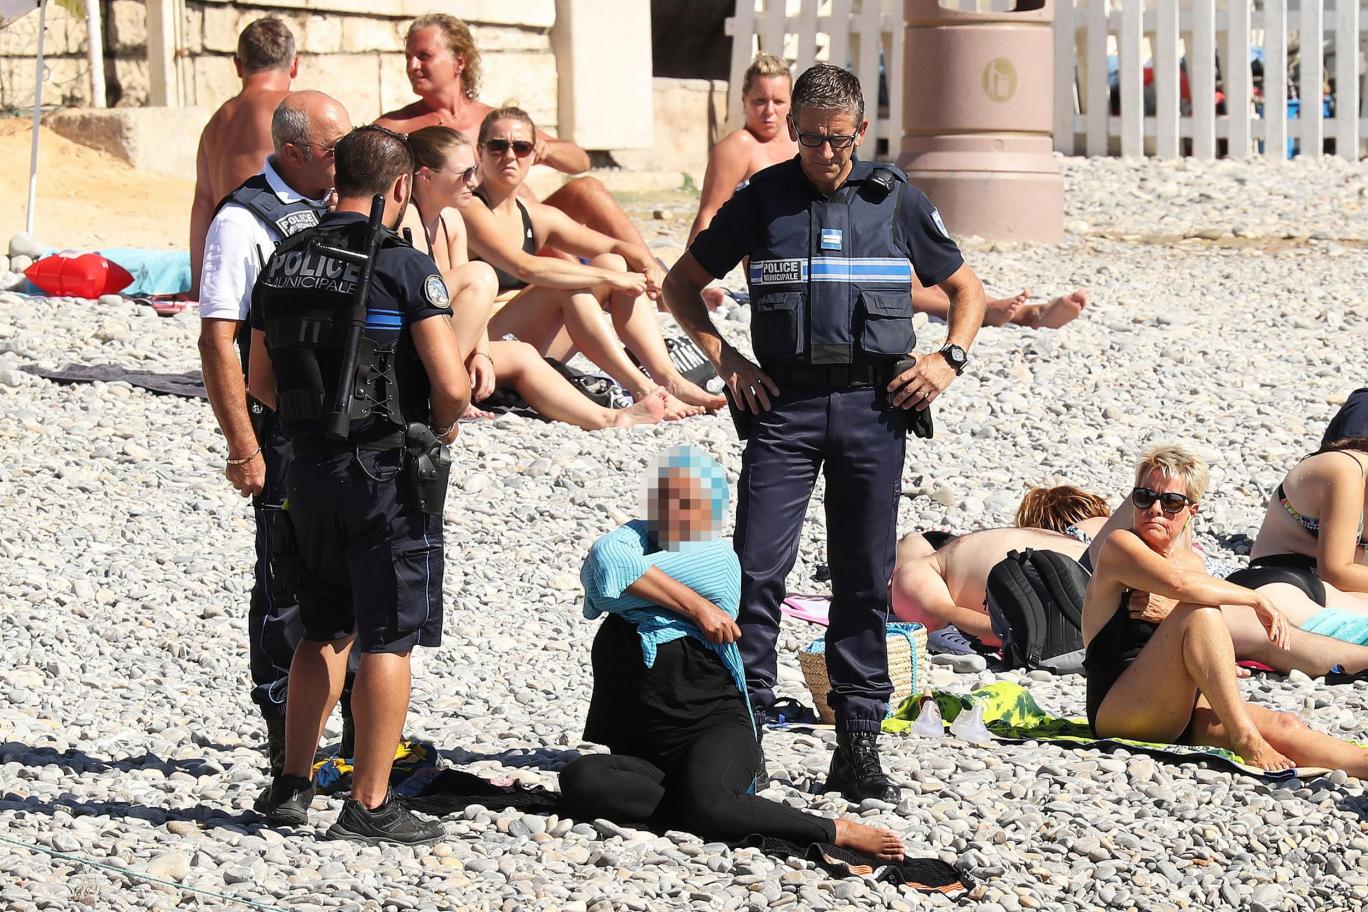 Women now face fines for wearing Burkinis on beaches in some French resorts Vantage News